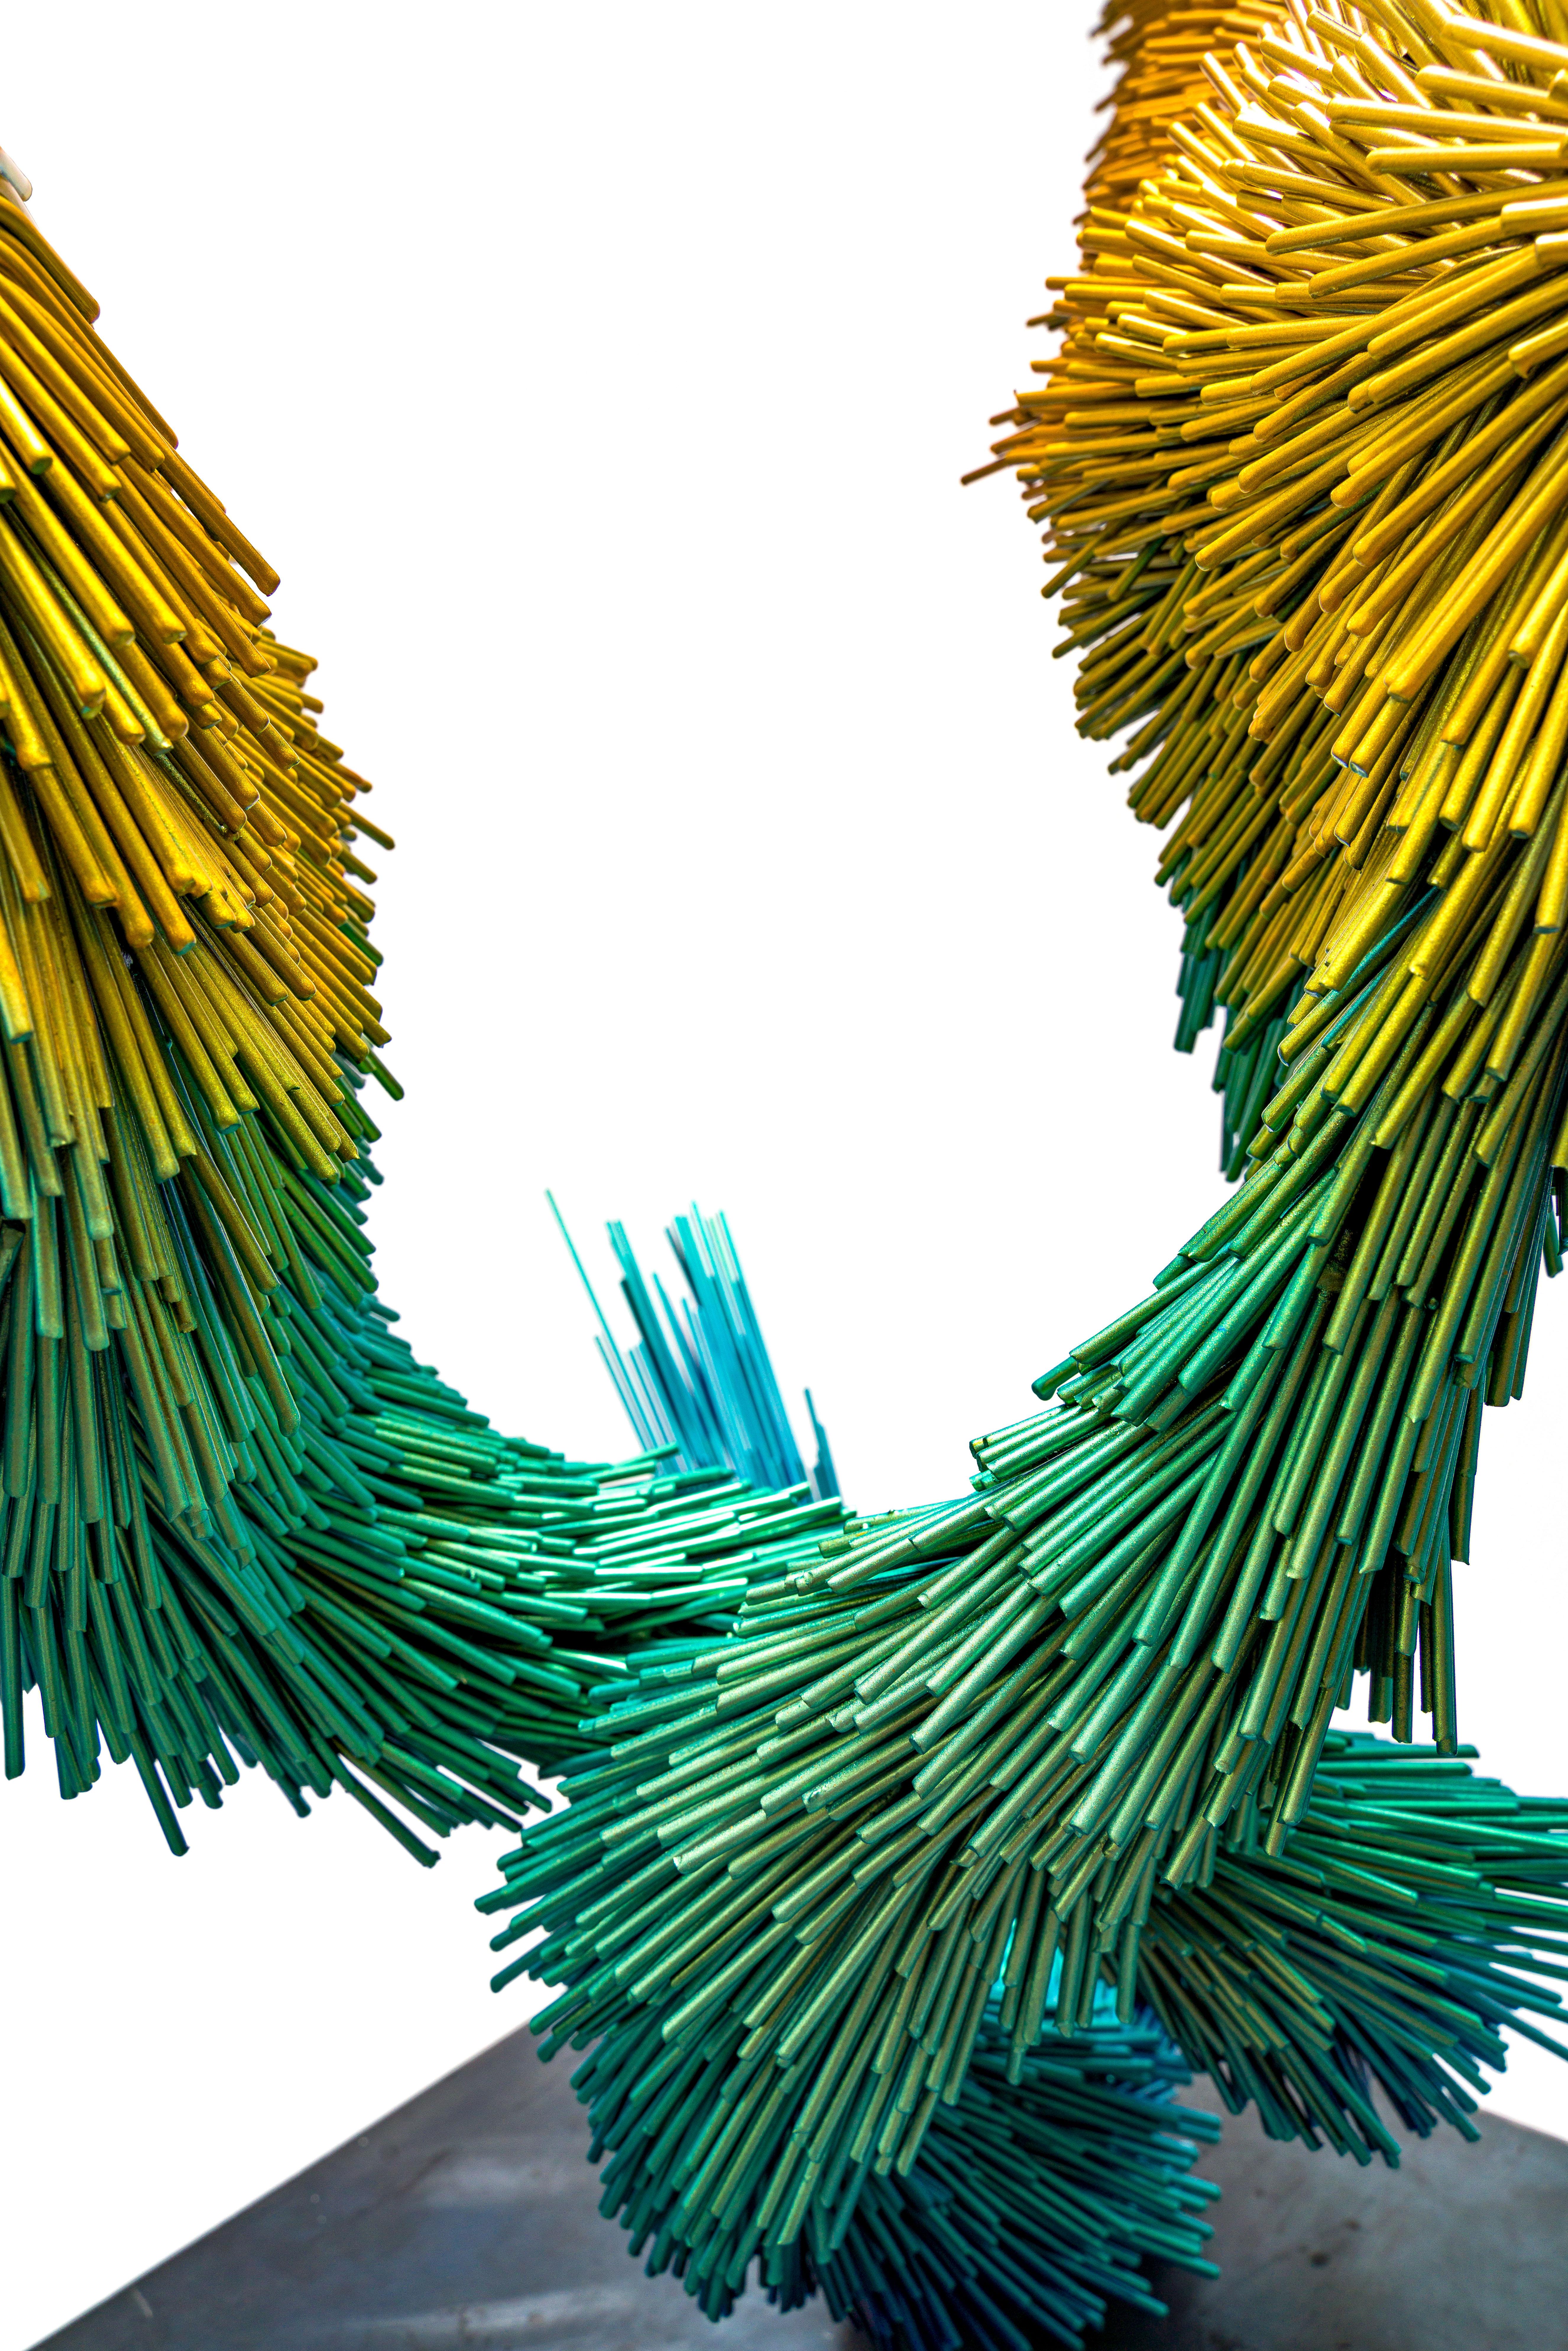 Fleeting Murmur, Steel contemporary bird sculpture in yellow, green and blue For Sale 2